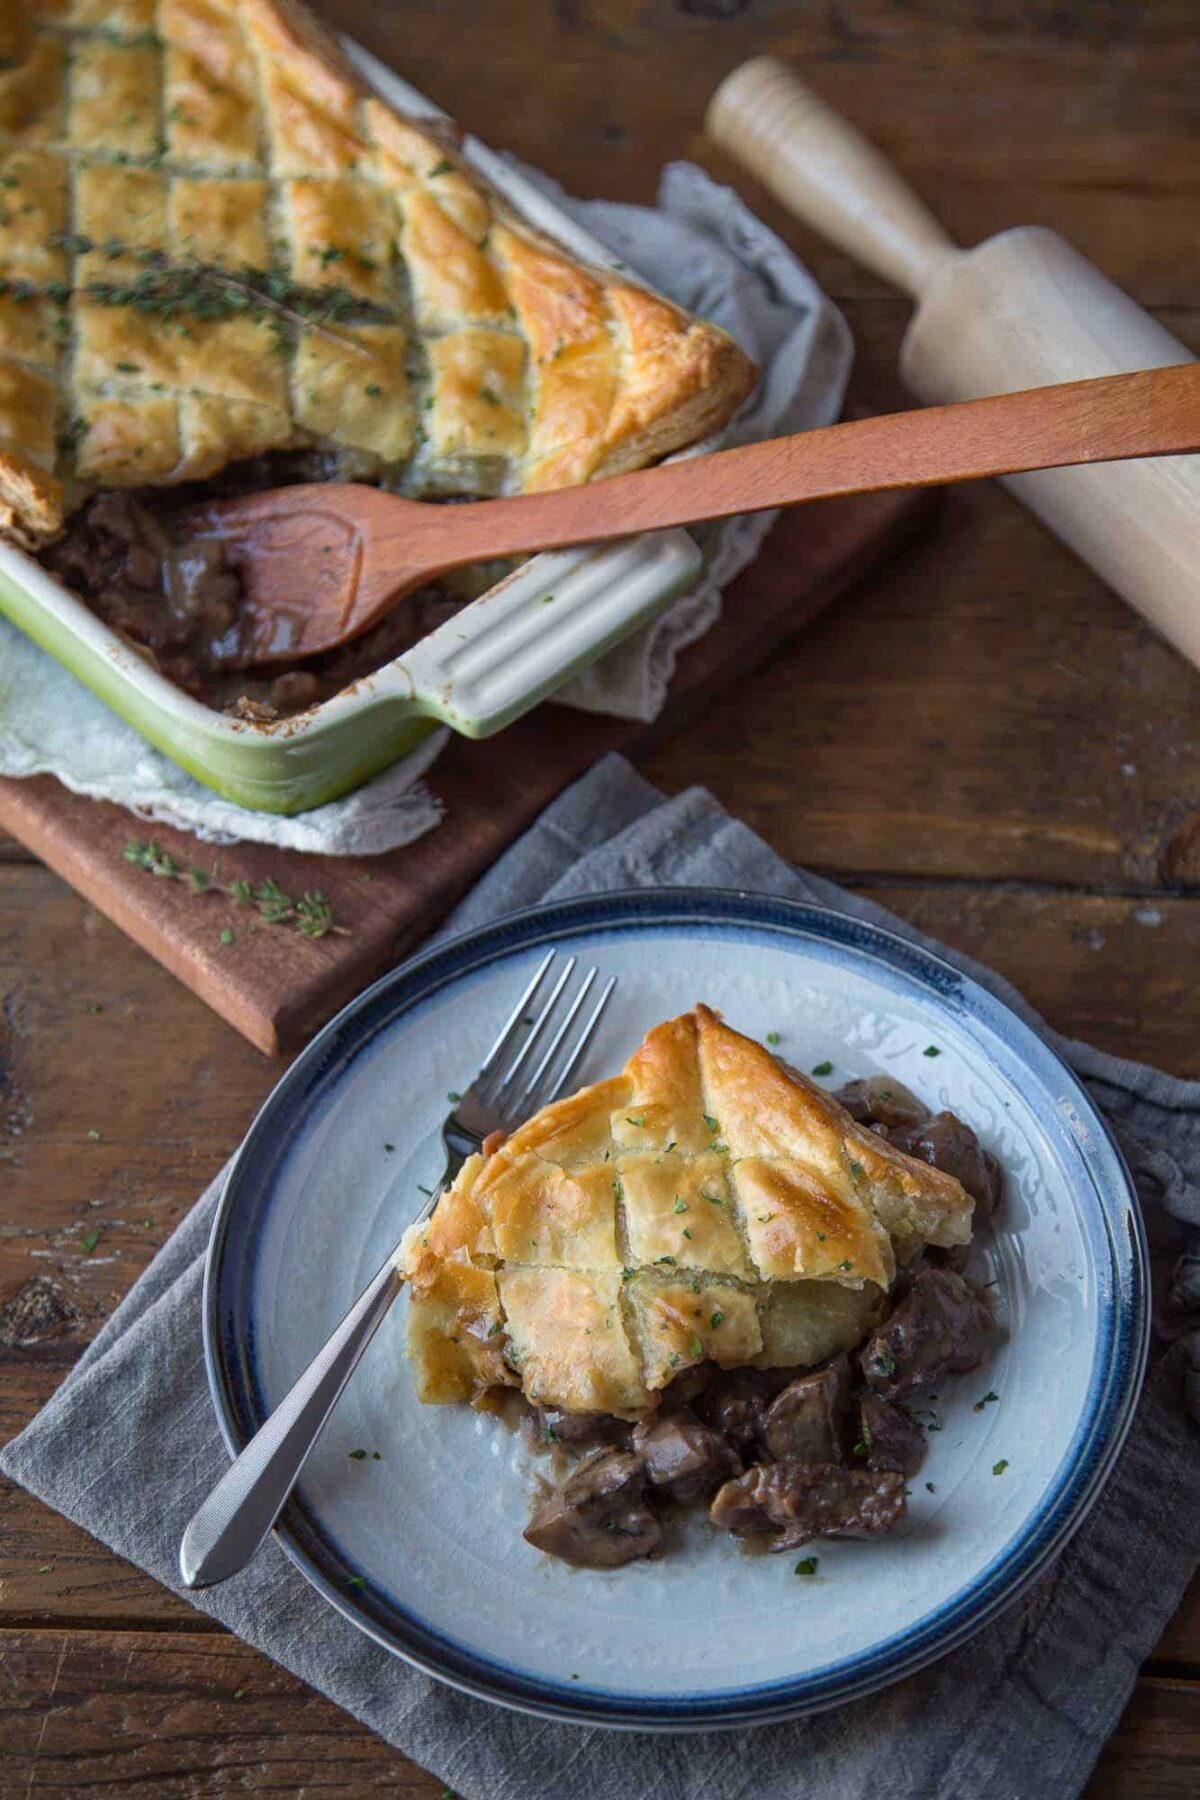 Beef Wellington Pot Pie on a plate with a full casserole dish and a wooden spoon.